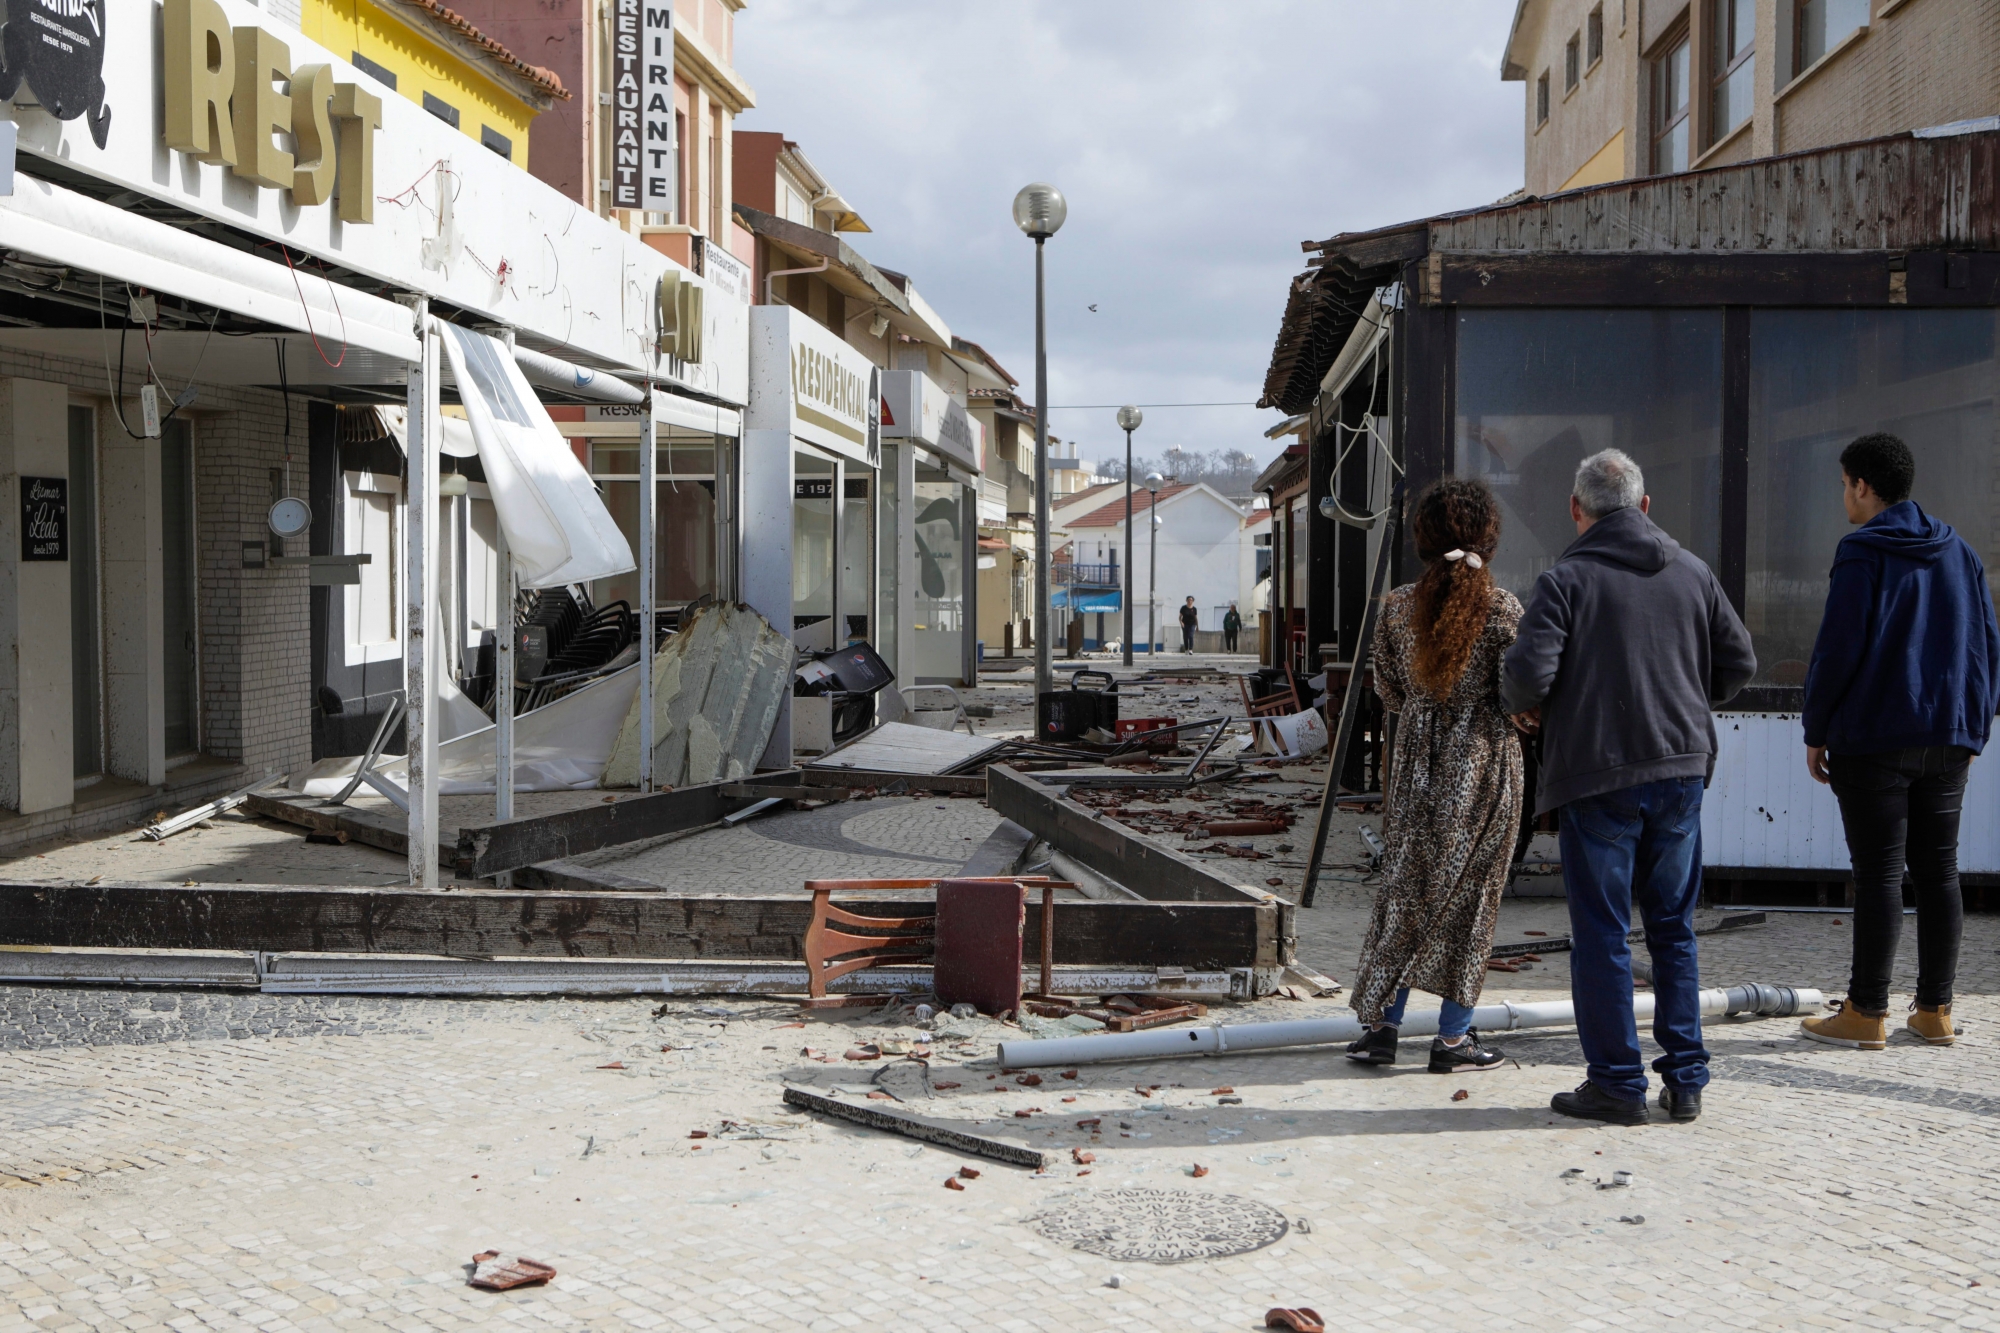 epa07092721 View of destroyed restaurants in Praia da Vieira ( Vieira beach) after the passage of storm Leslie in Praia da Vieira, Marinha Grande, central Portugal, 14 October 2018.   According to reports, winds gusting reached up to 176kph after the storm hit the country.  EPA/PAULO CUNHA PORTUGAL WEATHER STORM LESLIE